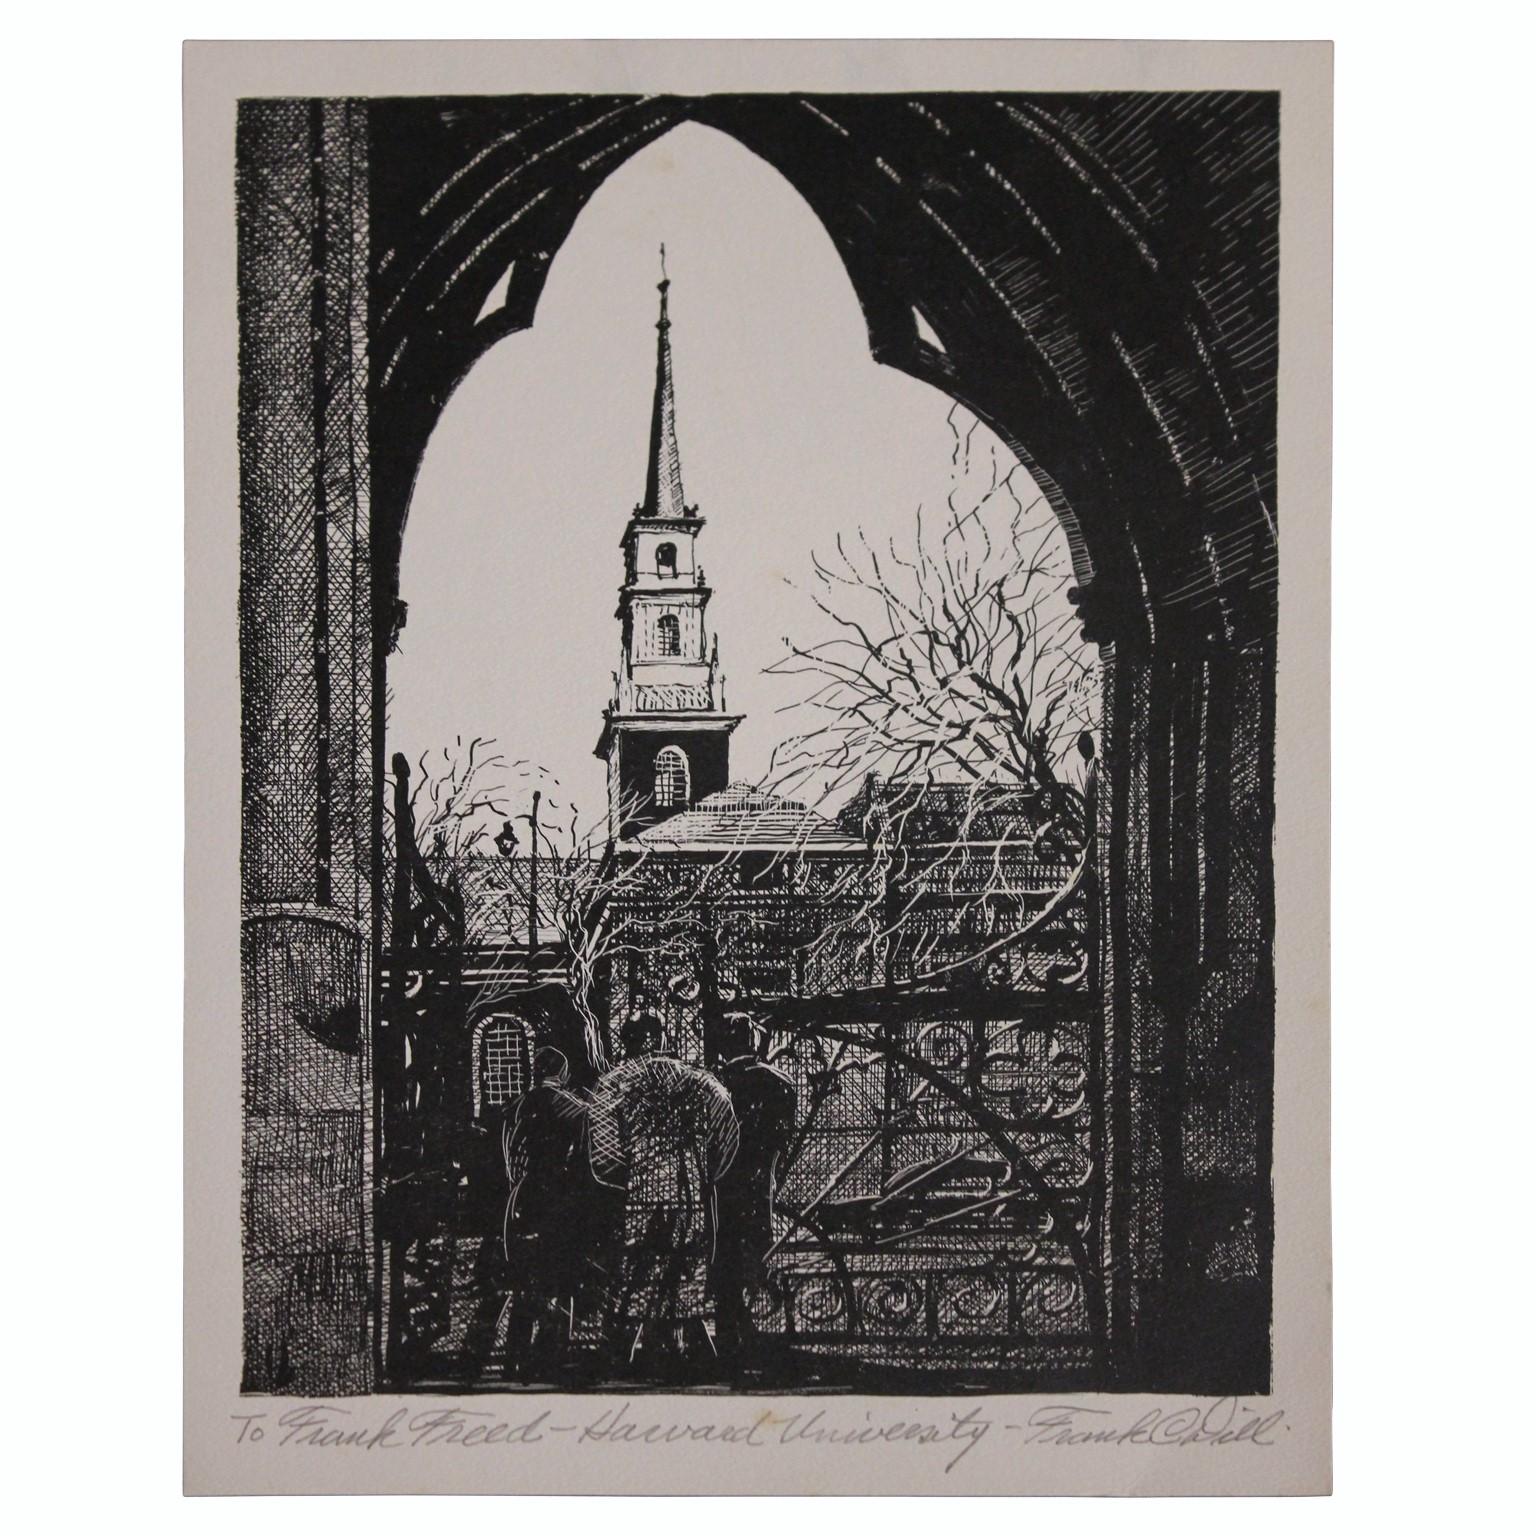 "Harvard University" Architectural Etching to Frank Freed